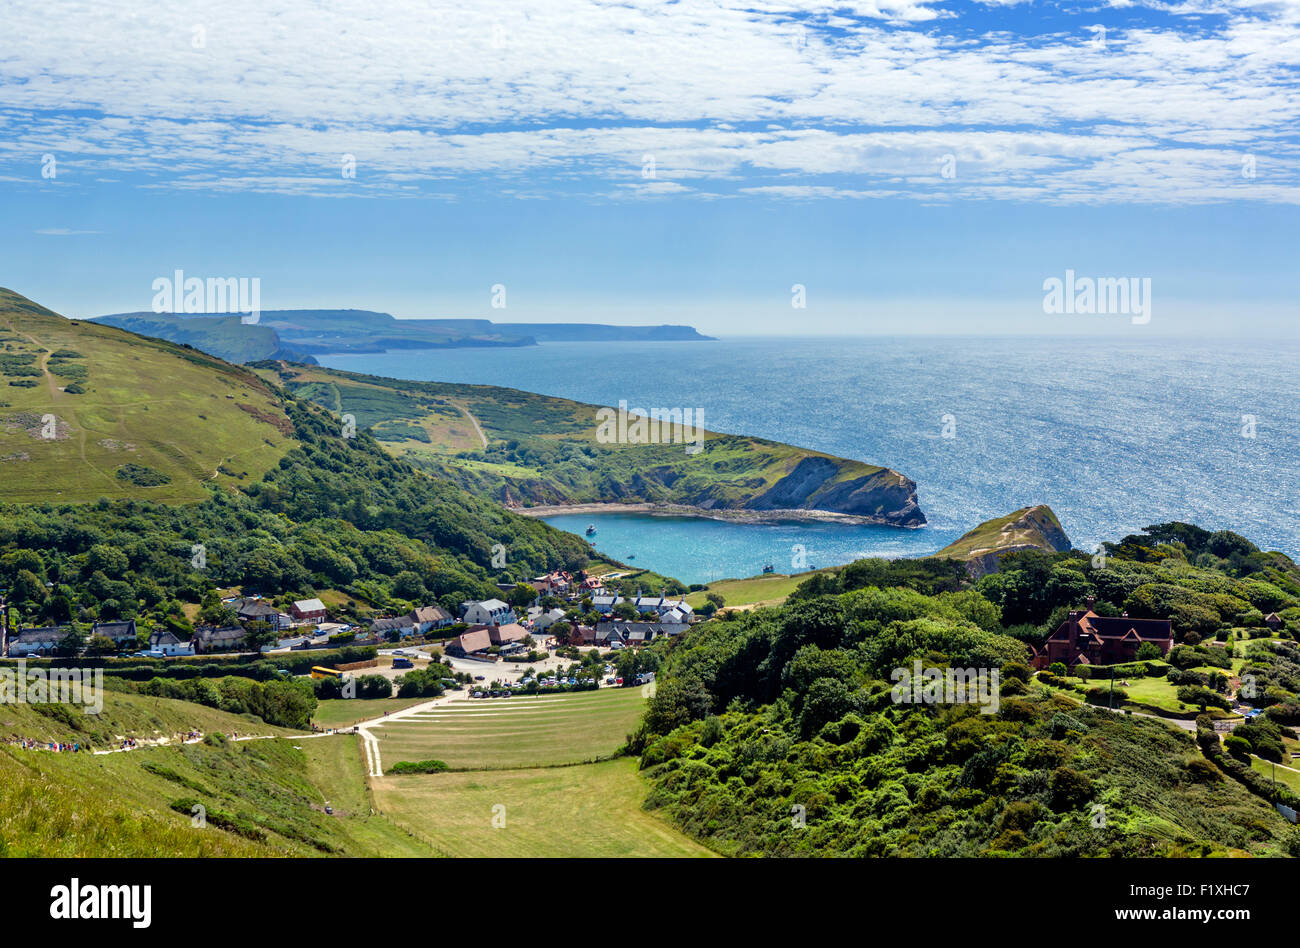 View from the South West Coast Path overlooking Lulworth Cove, Lulworth, Jurassic Coast, Dorset, England, UK Stock Photo